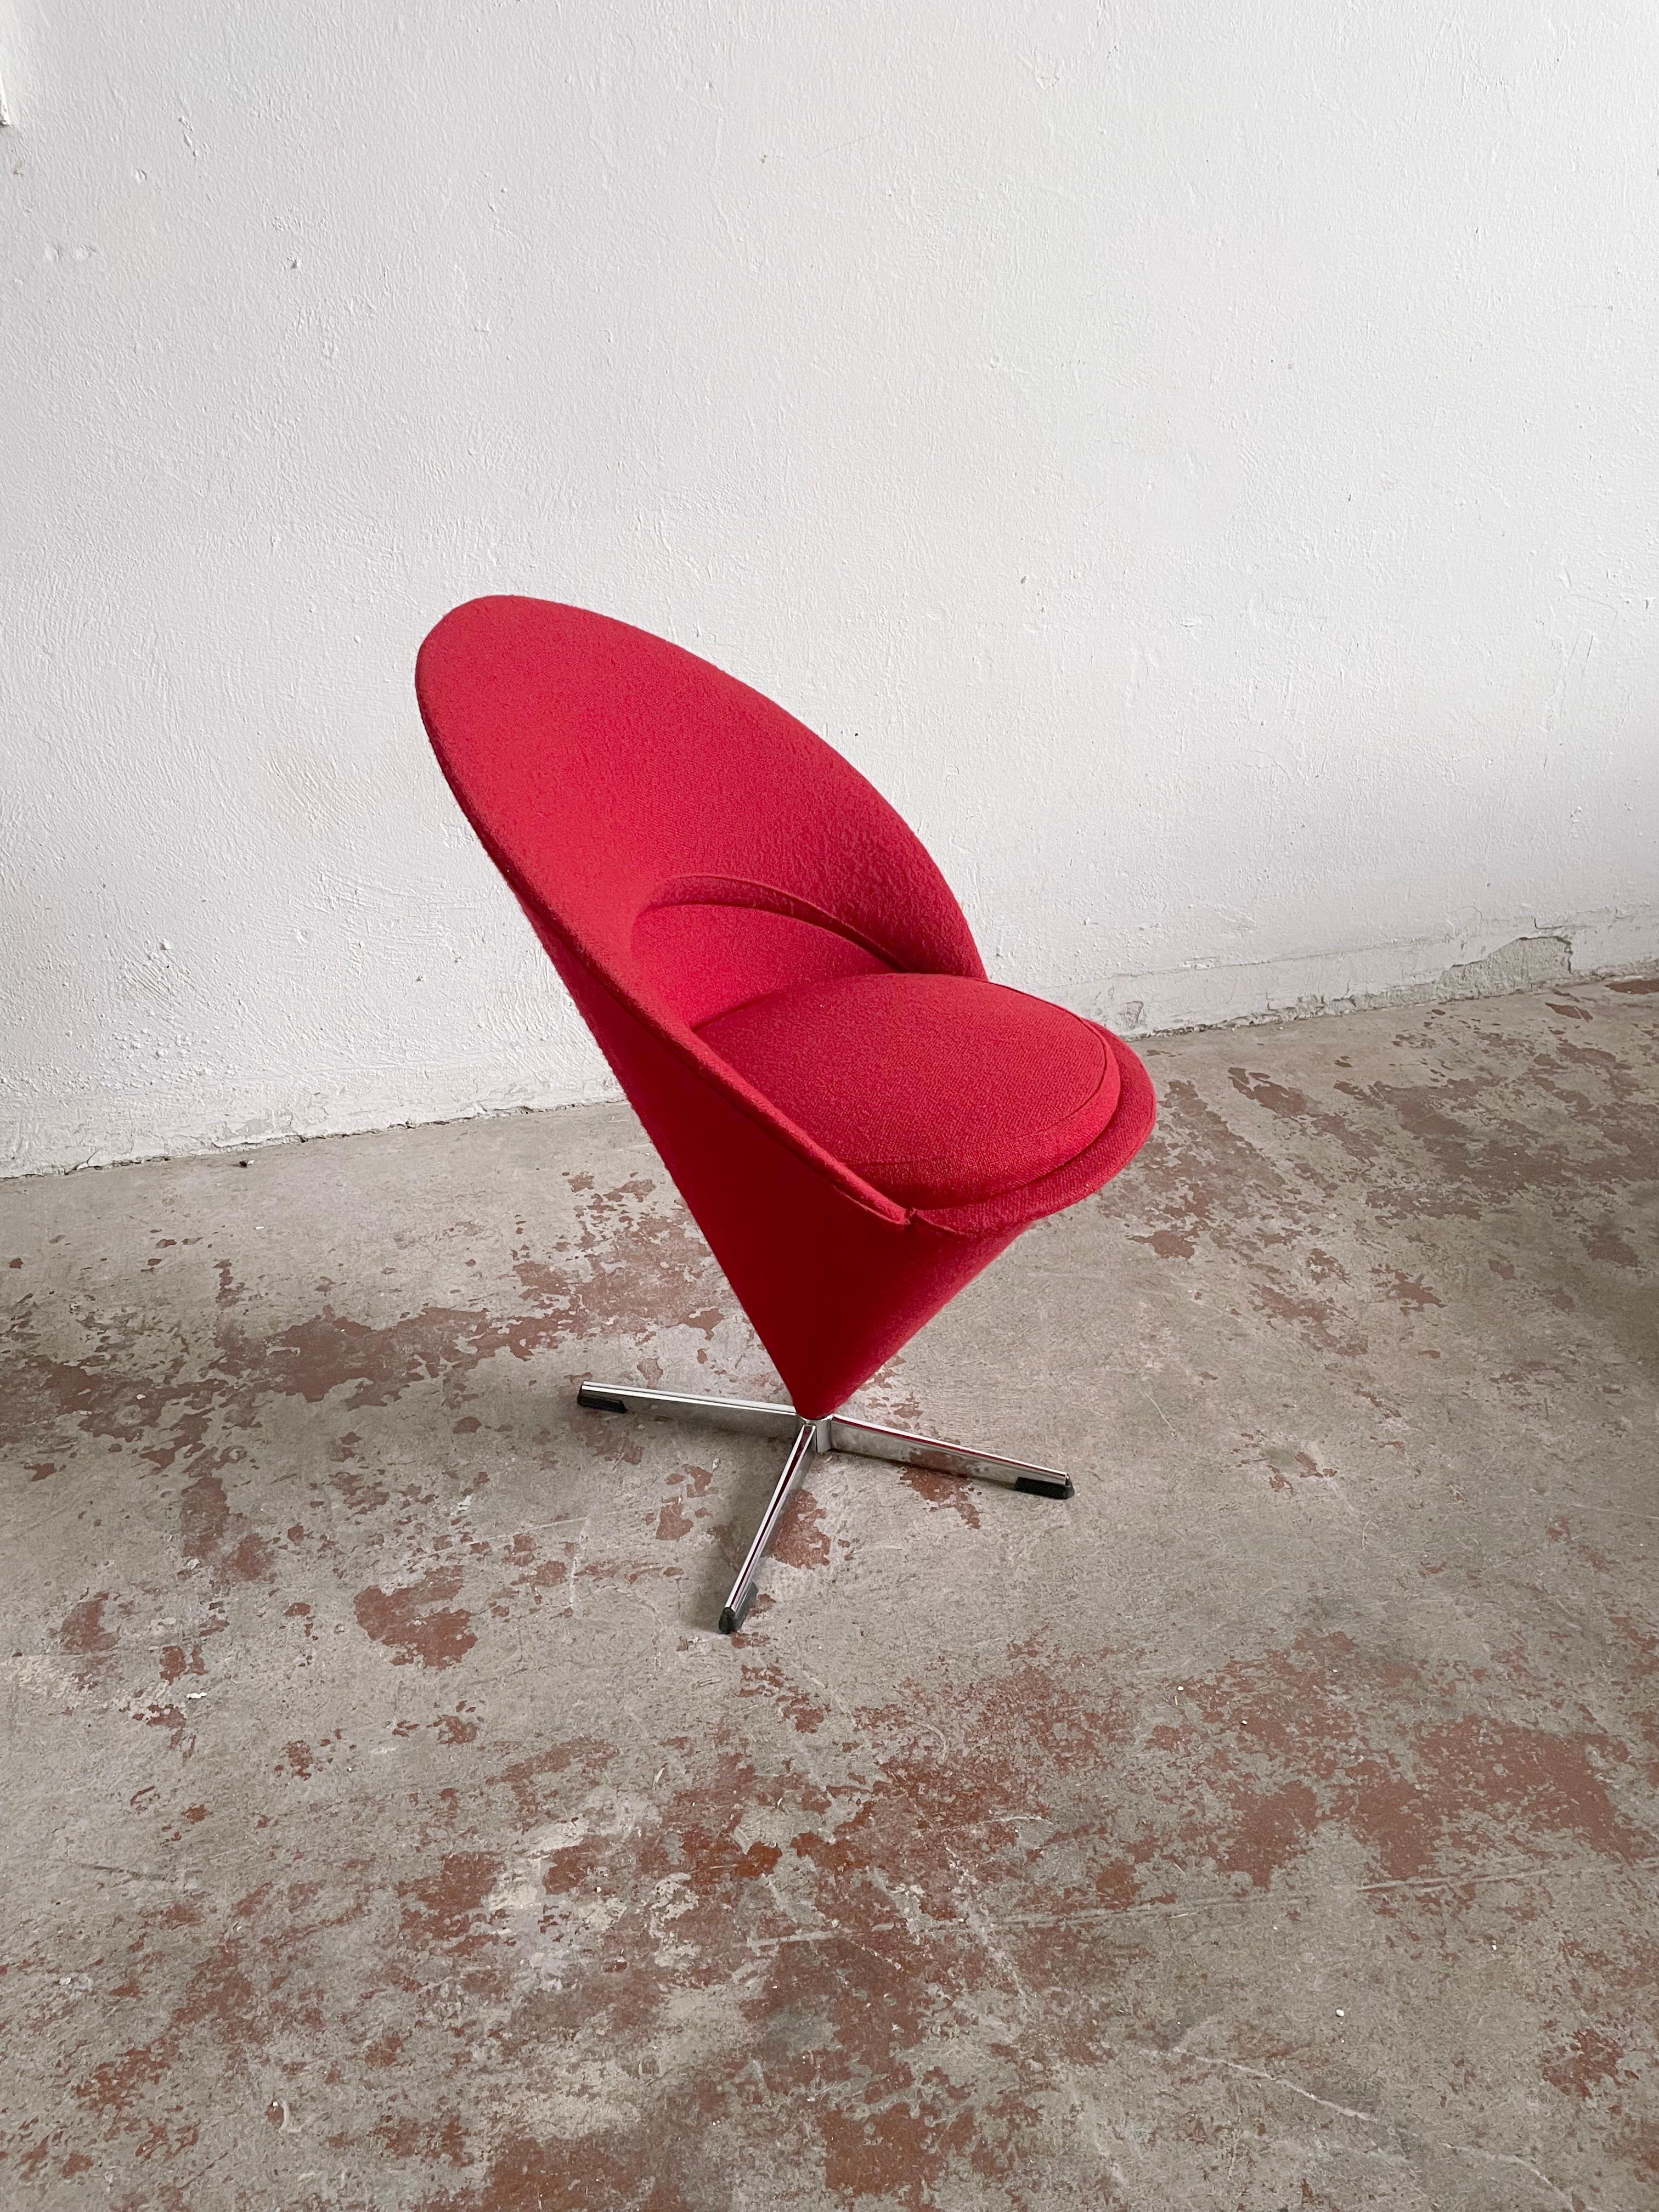 Iconic swivel 'Cone' chair designed in 1958 by famous Danish designer Verner Panton

Made by Plus-Linje, Denmark. Production started in 1958.

Dimensions: 83 x 58.5 x 60 cm (H/W/D), Seat height is 48 cm, The diameter of the seat is 42 cm

The